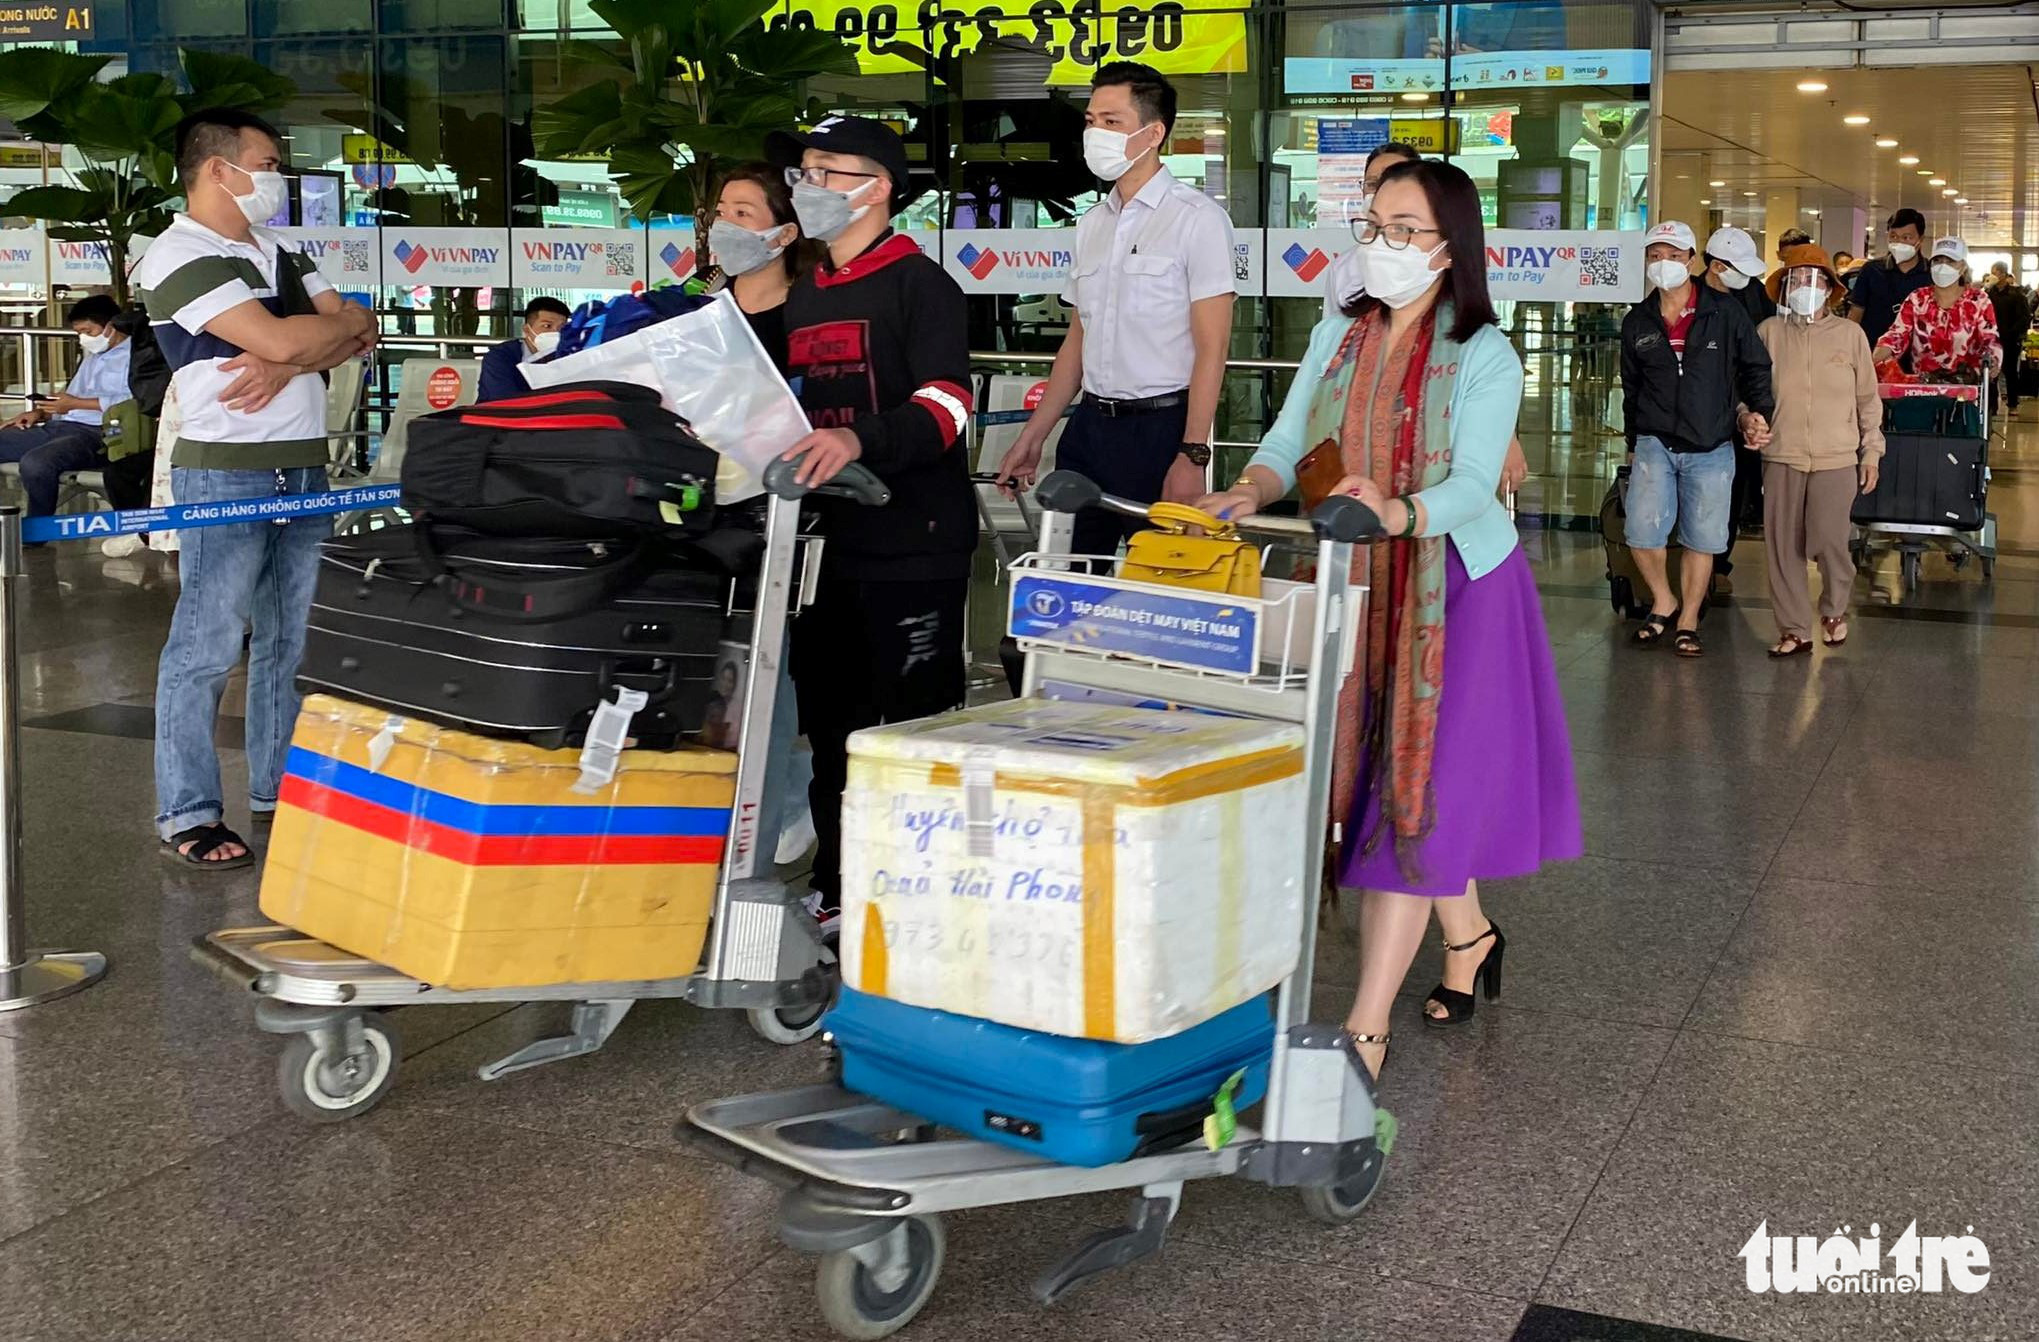 Ho Chi Minh City requires rapid COVID-19 tests on all airport int’l arrivals